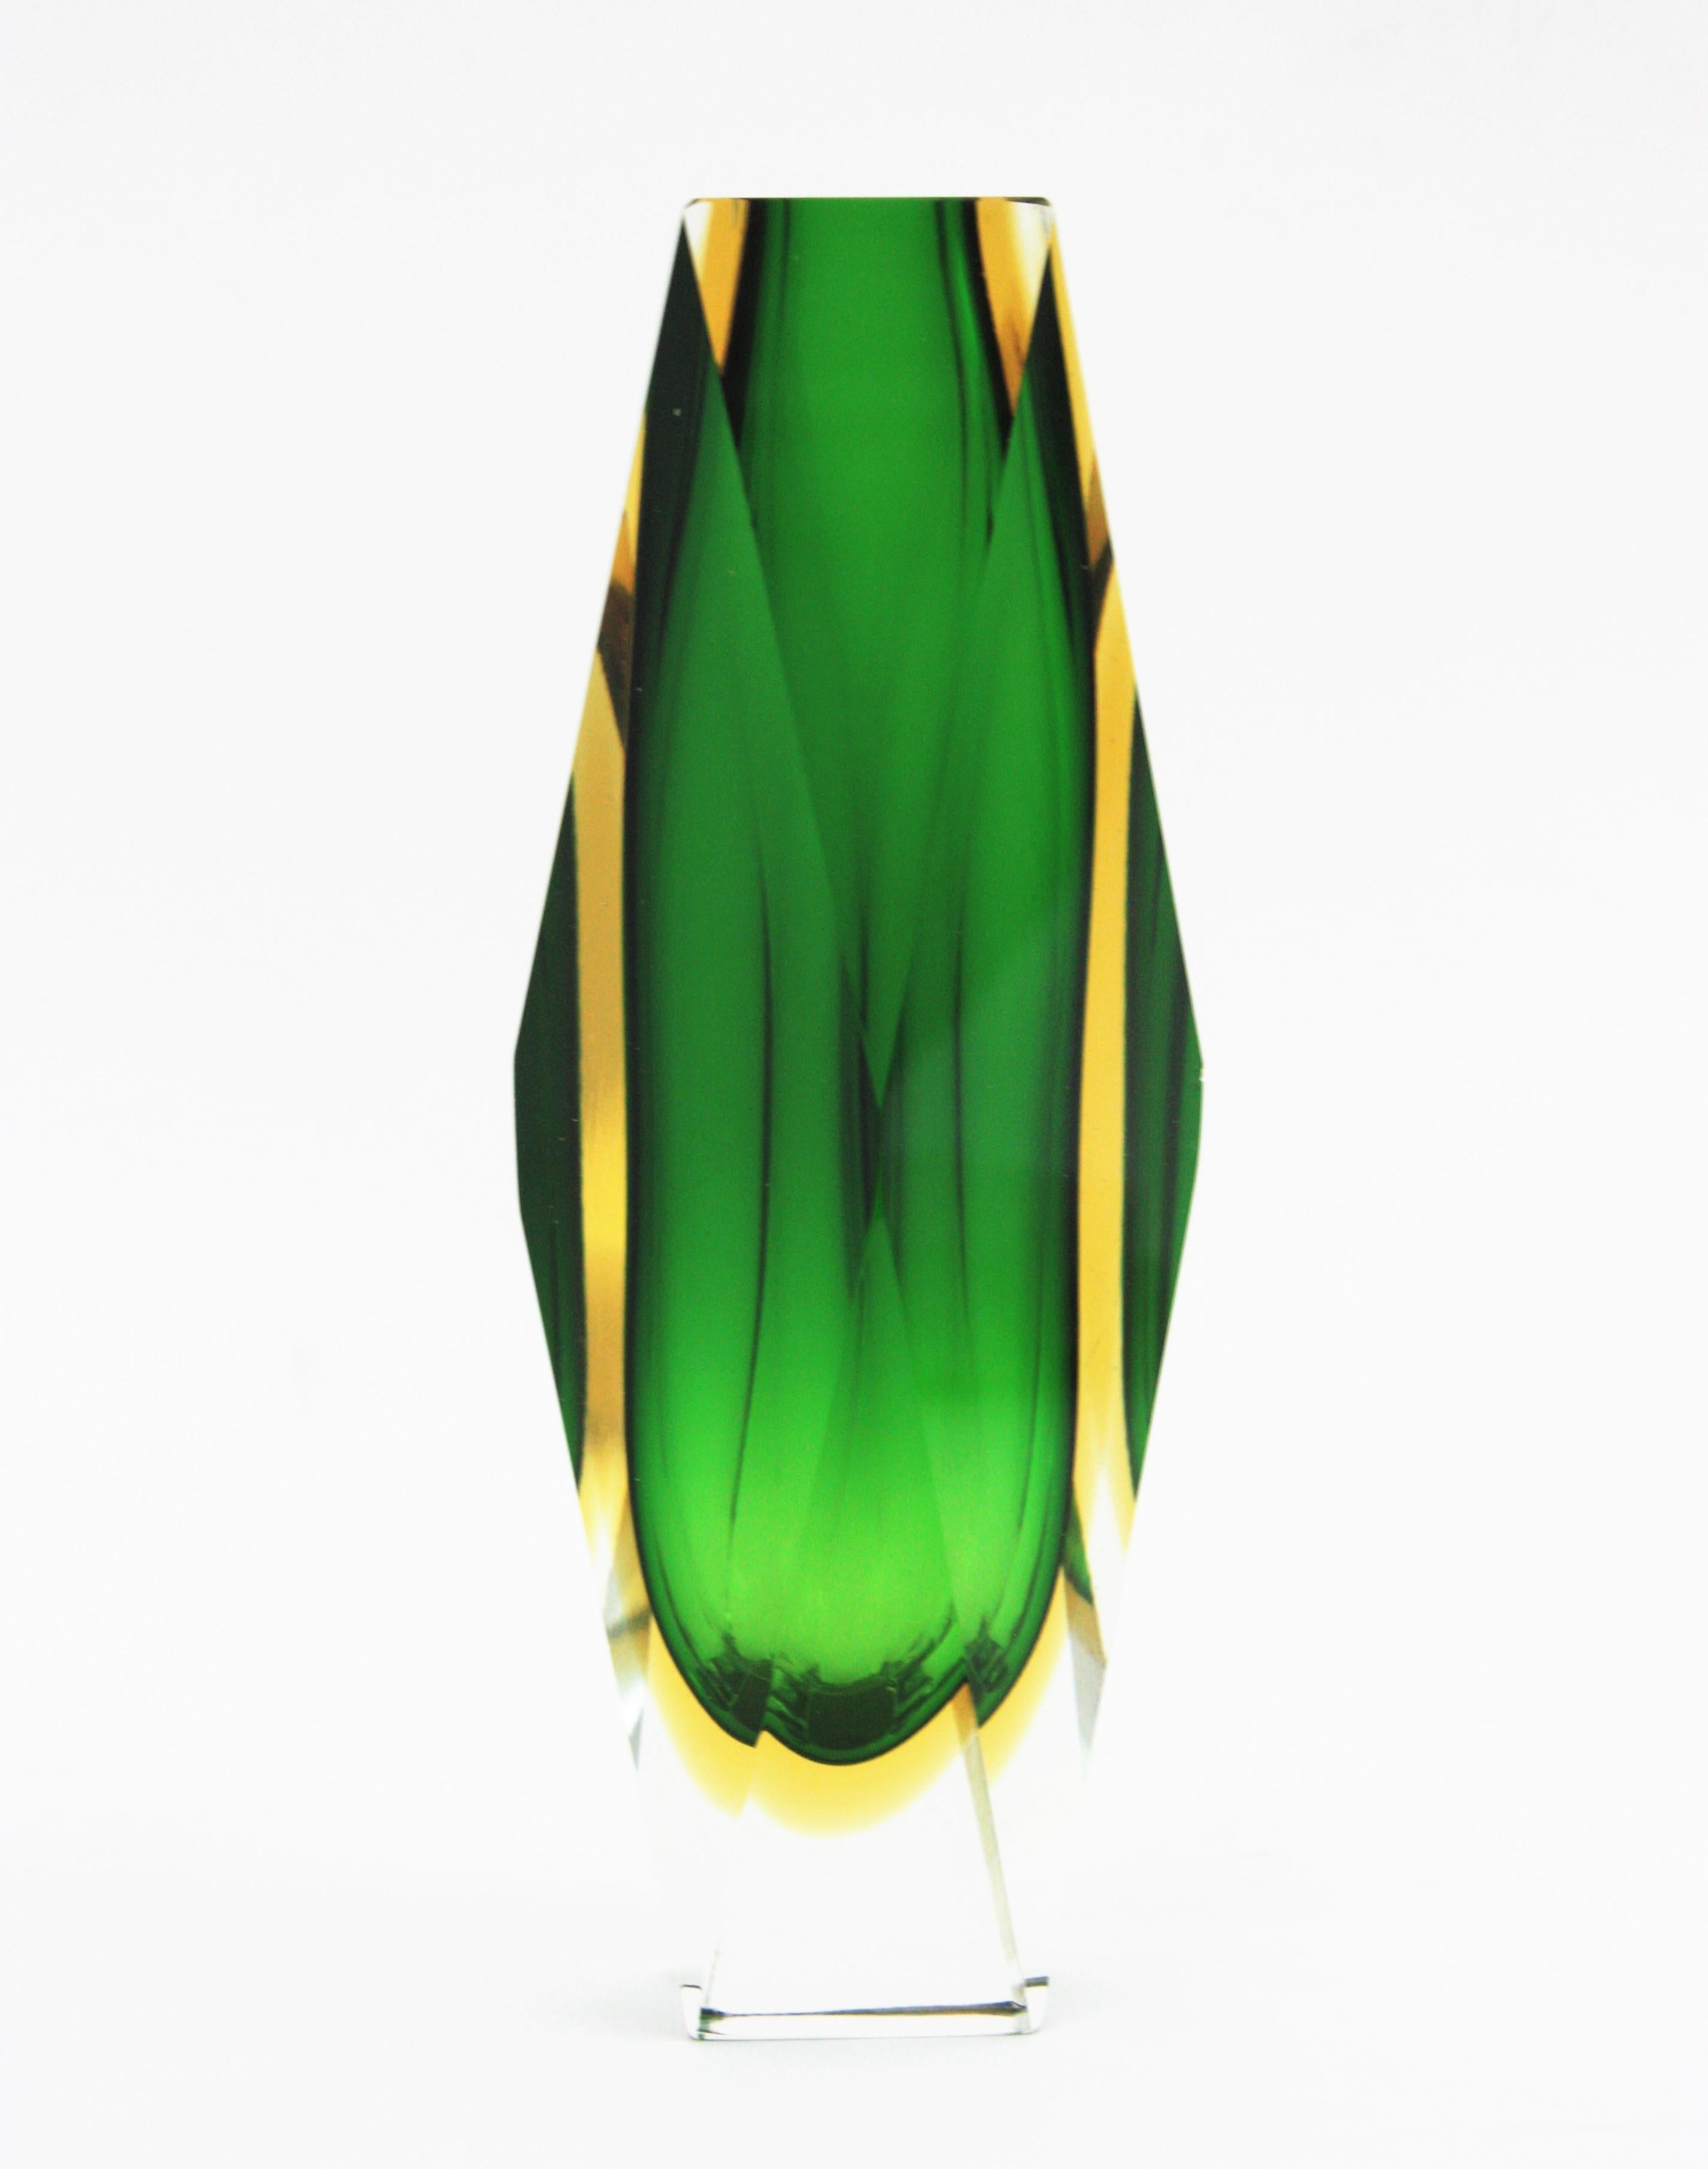 Massive Sommerso vase with faceted glass in Green and yellow glass cased into clear glass. Attributed to Mandruzzato, Italy, 1960s.
Green glass with a layer of yellow glass cased into clear glass using the Sommerso technique.
Gorgeous placed as a